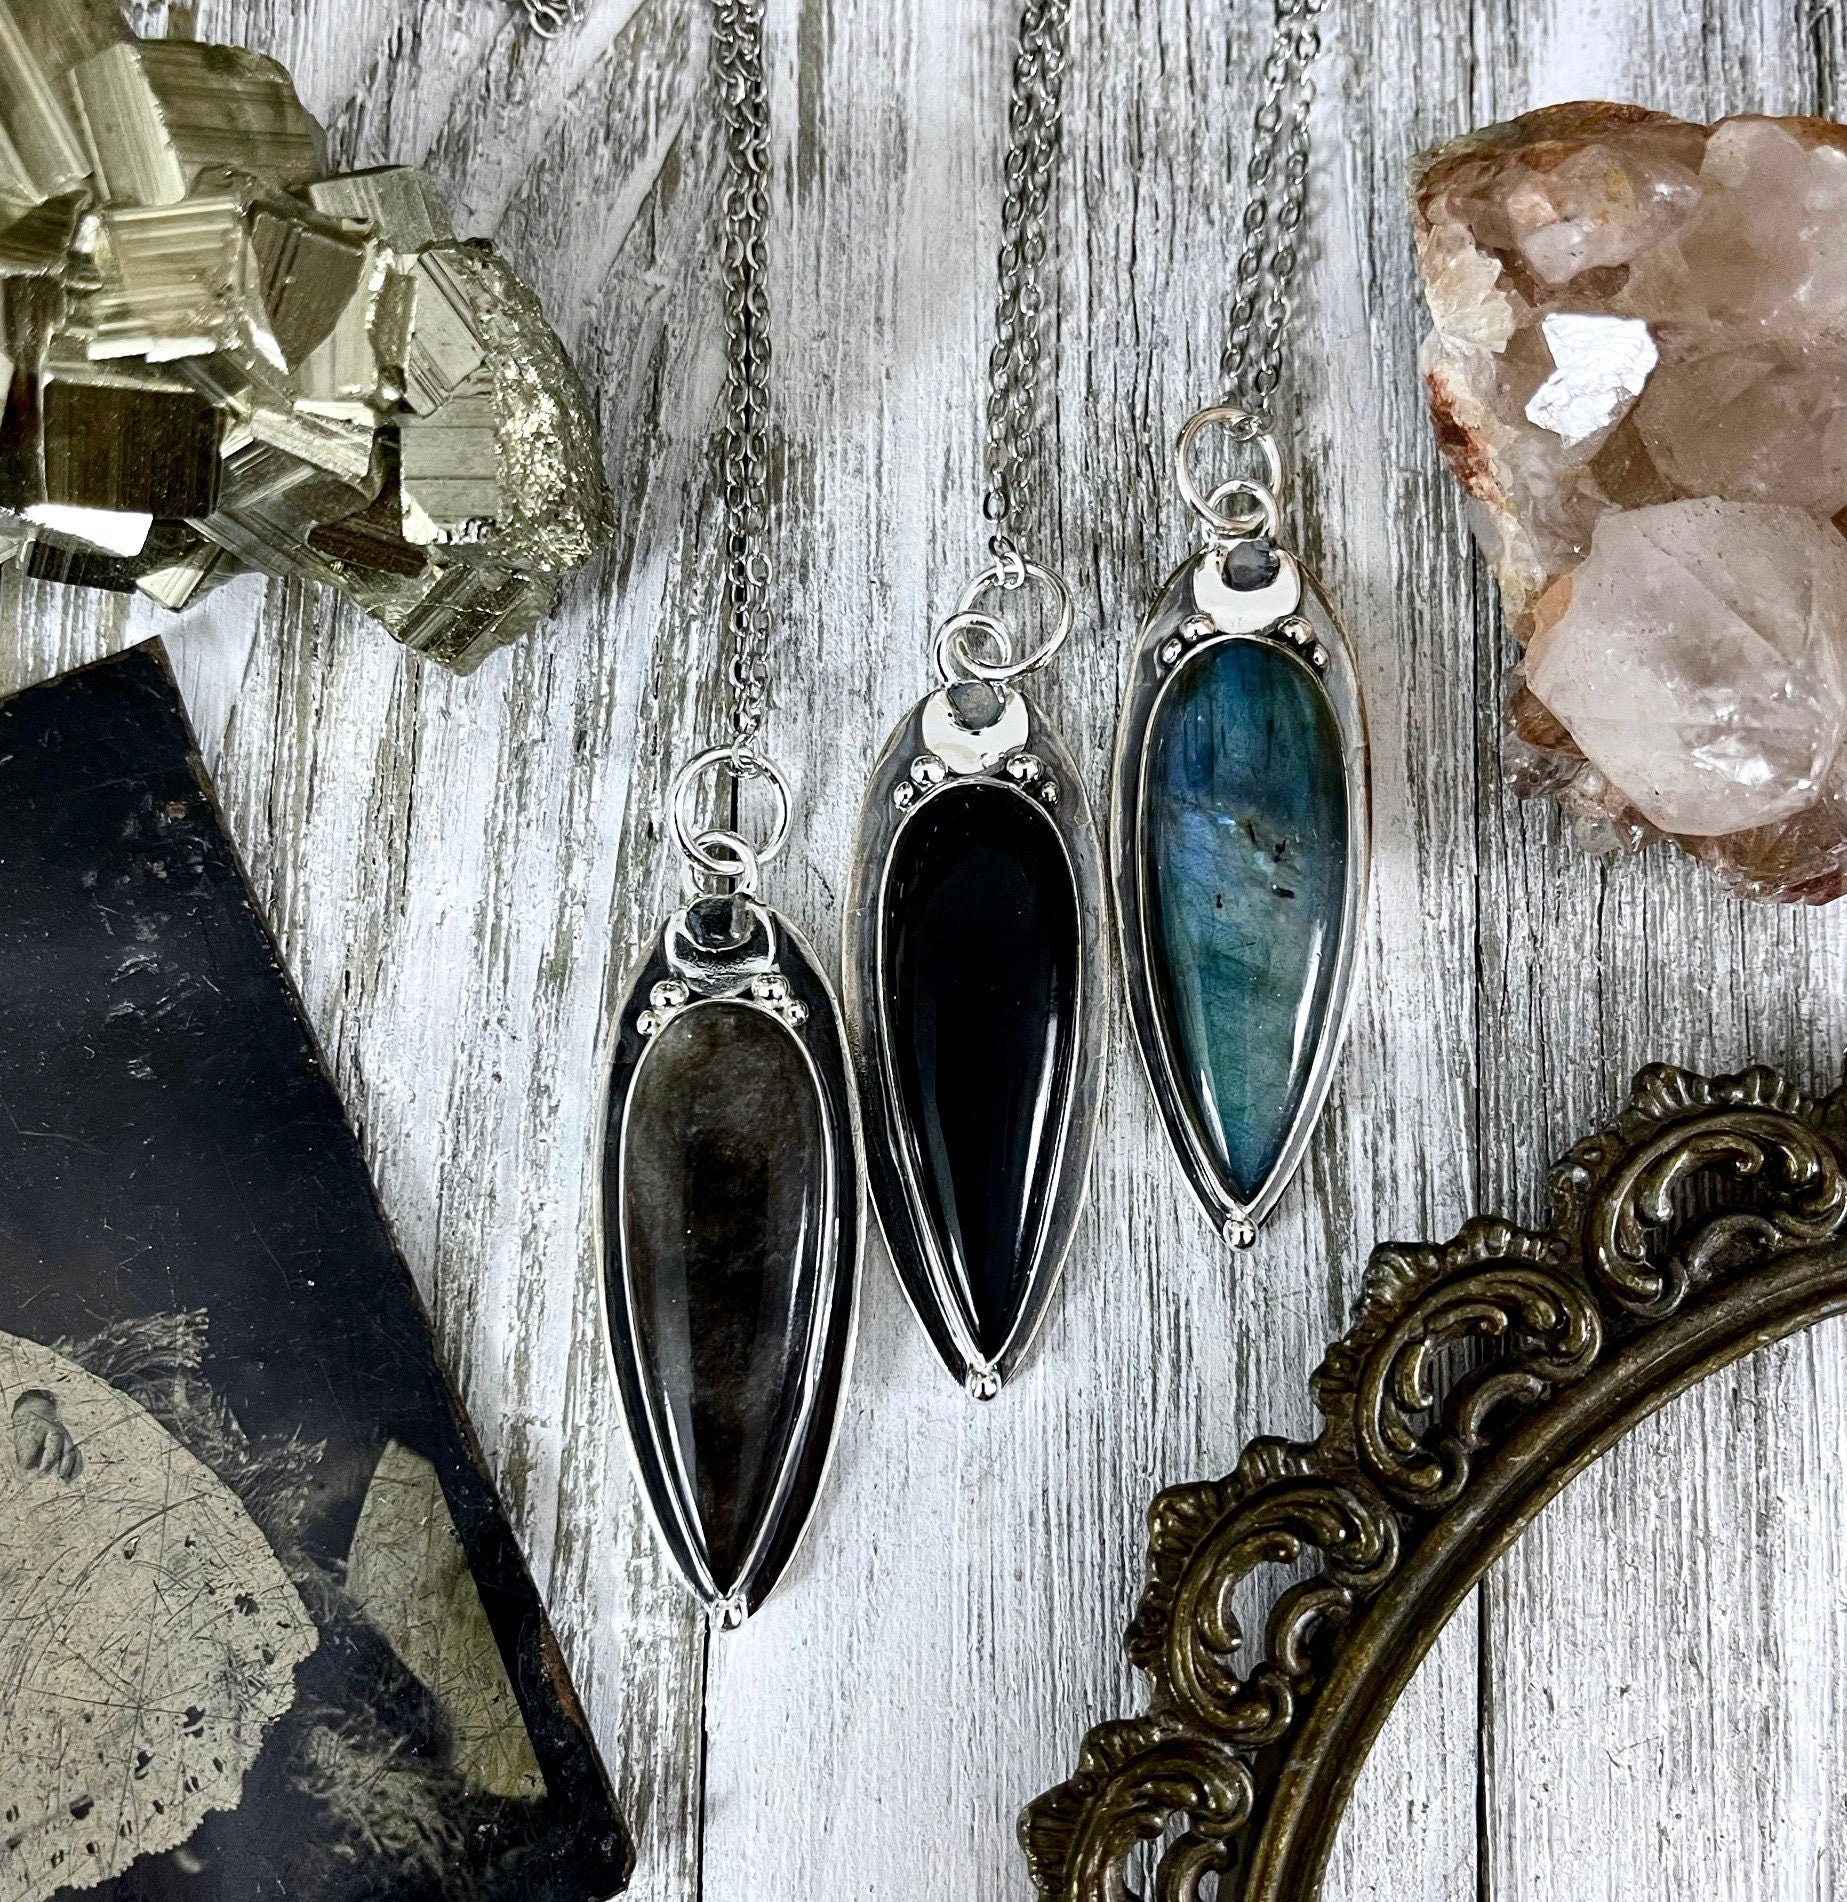 Magic Moon Crystal Necklace in Sterling Silver- Silver Sheen Obsidian,  Black Onyx or Labradorite -Designed by FOXLARK Collection